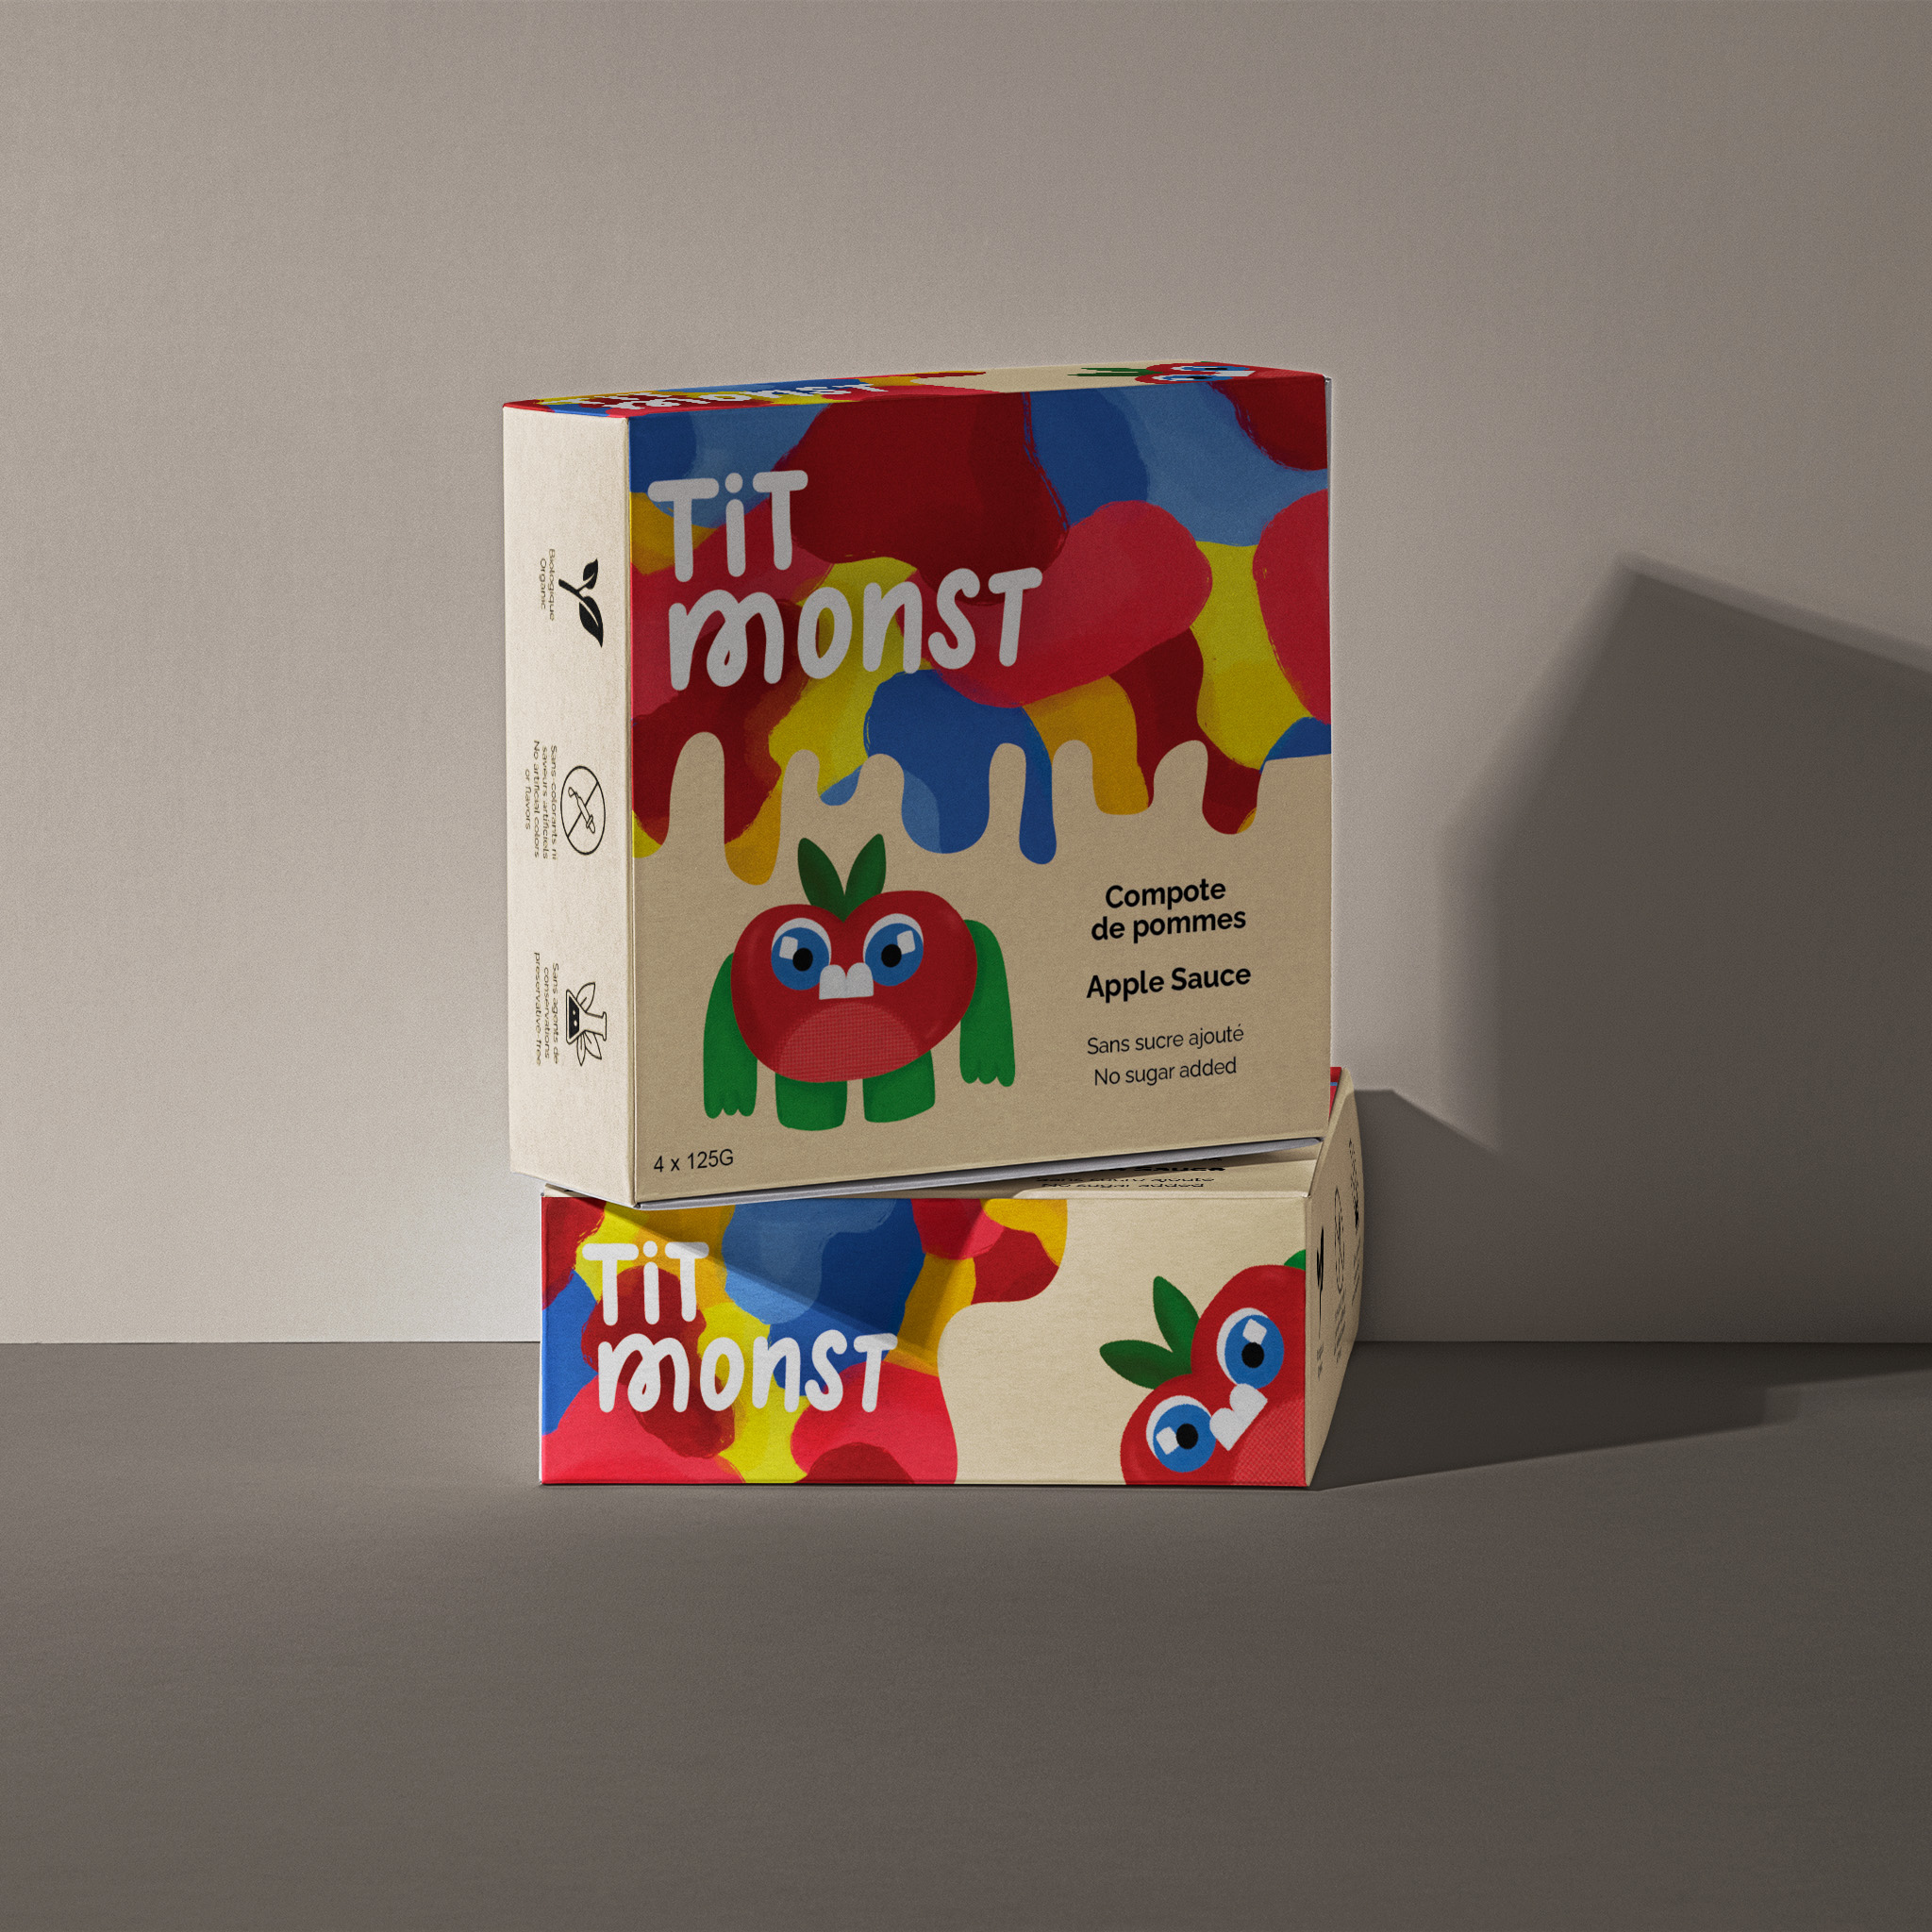 box mockup design of an apple sauce company with a monster and colourful and abstract illustration.